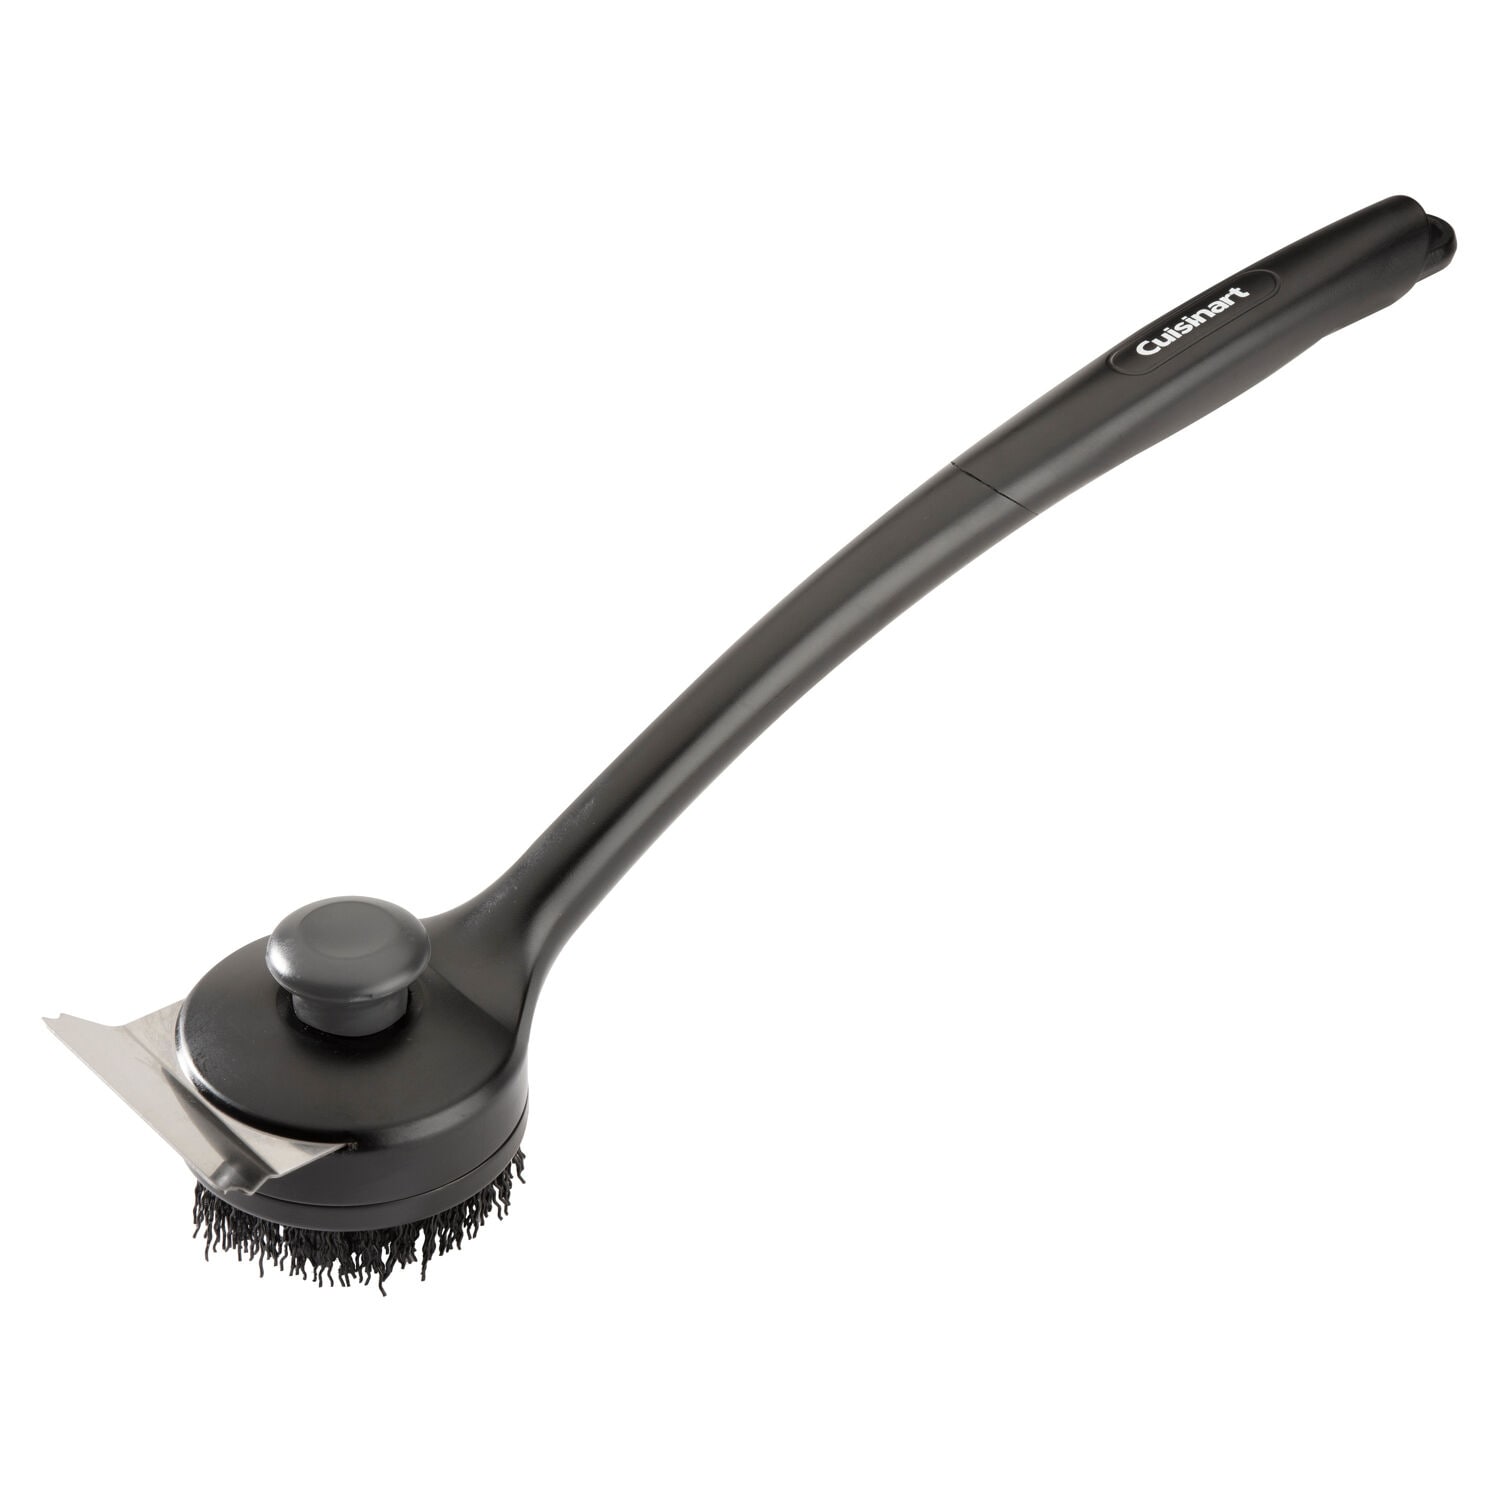 Cuisinart 21 Tri Wire Grill Brush - Stainless Steel Bristles